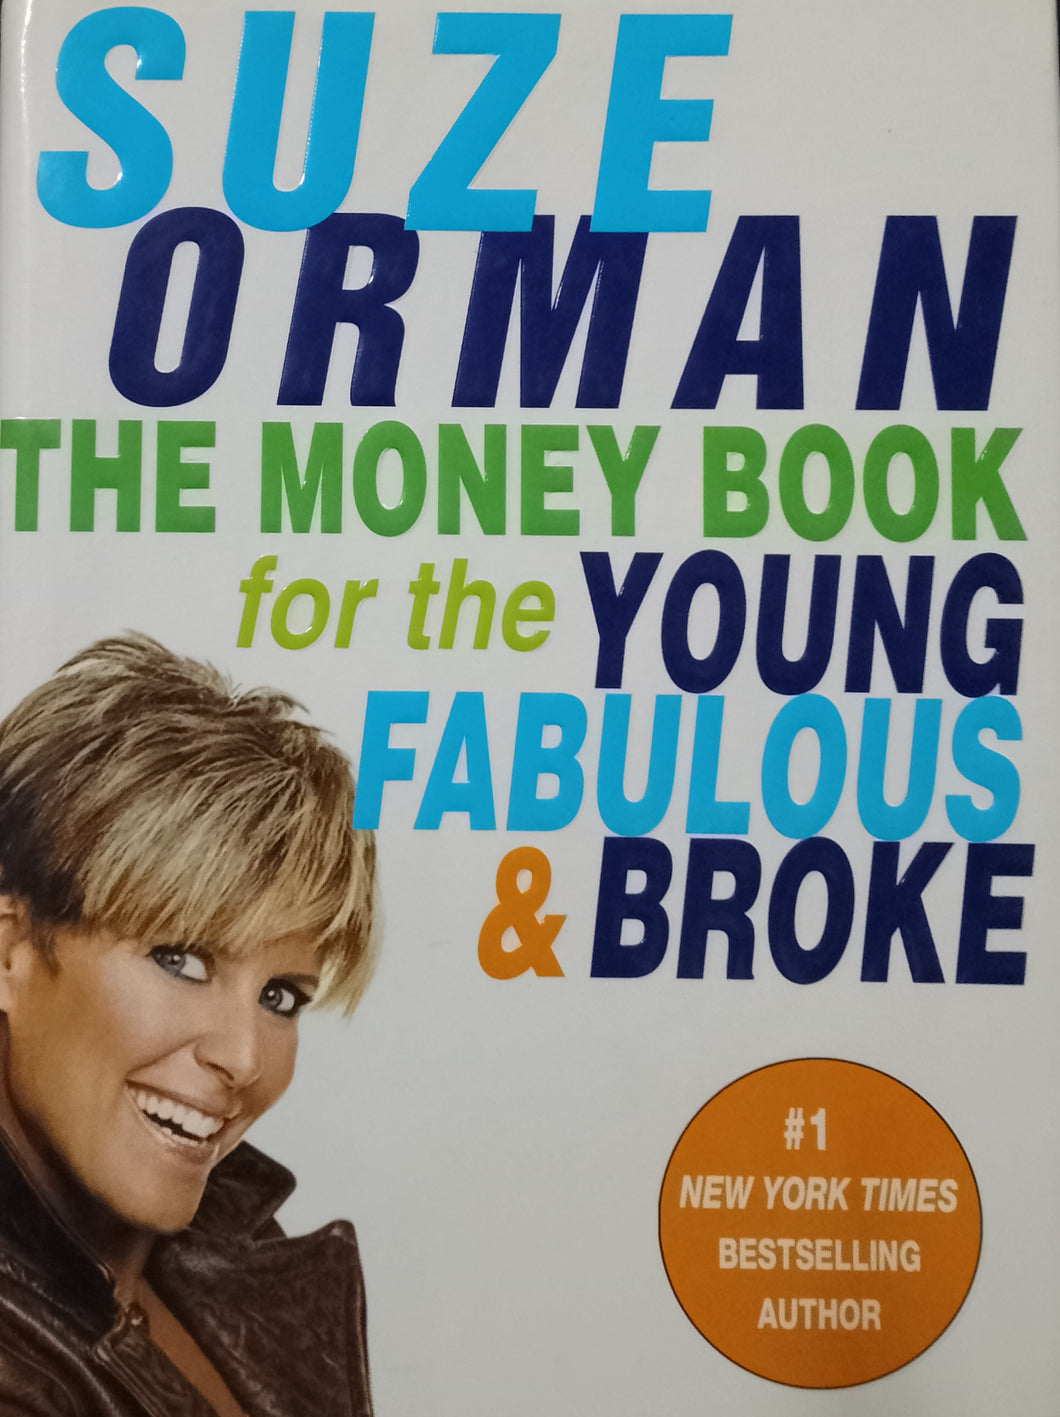 The Money Book For The Young Fabulous & Broke by Suze Orman